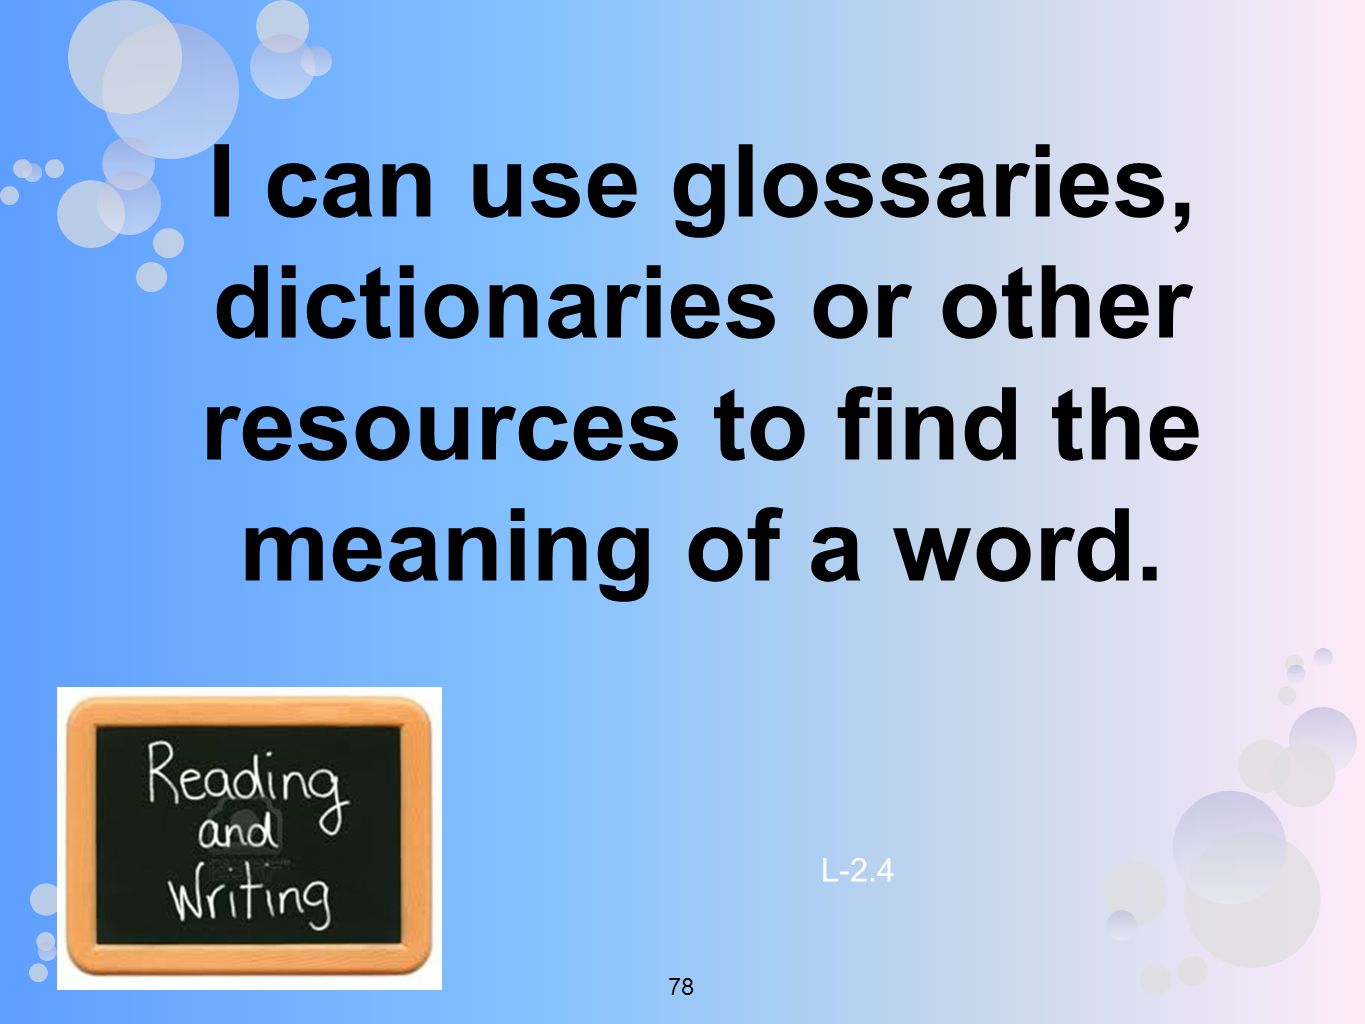 I can use glossaries, dictionaries or other resources to find the meaning of a word. L